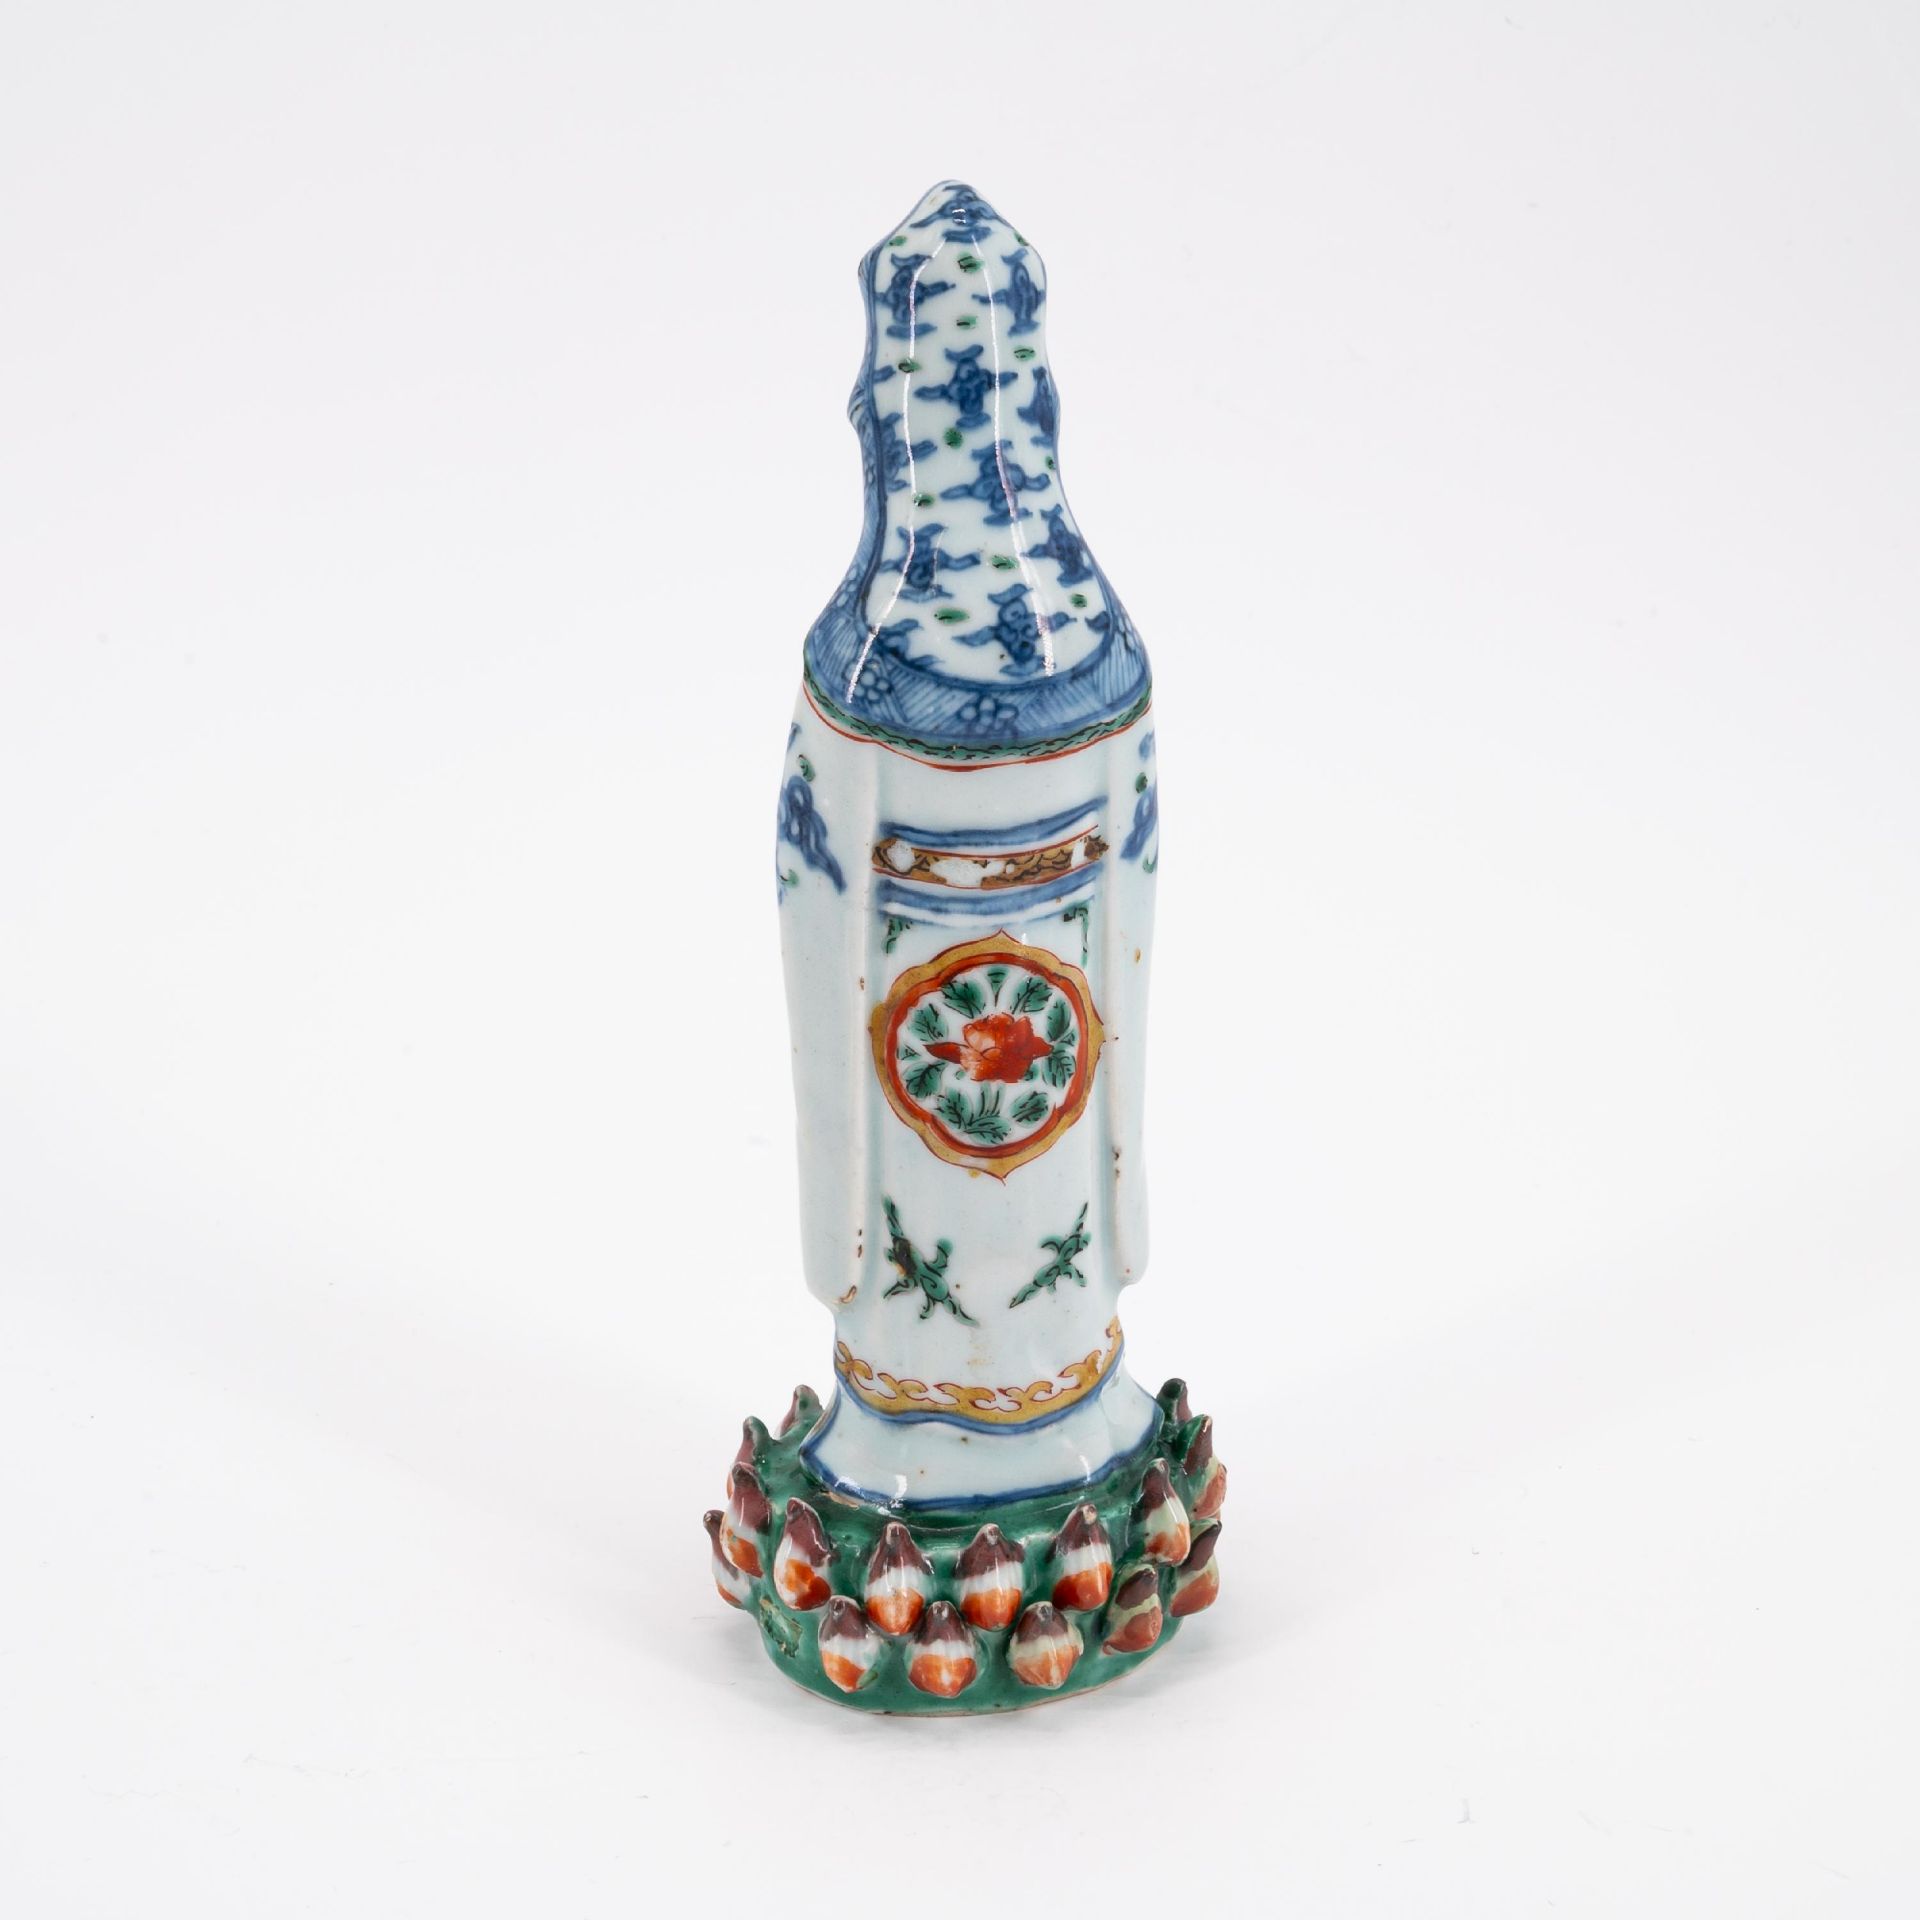 STANDING PORCELAIN GUANYIN - Image 3 of 5